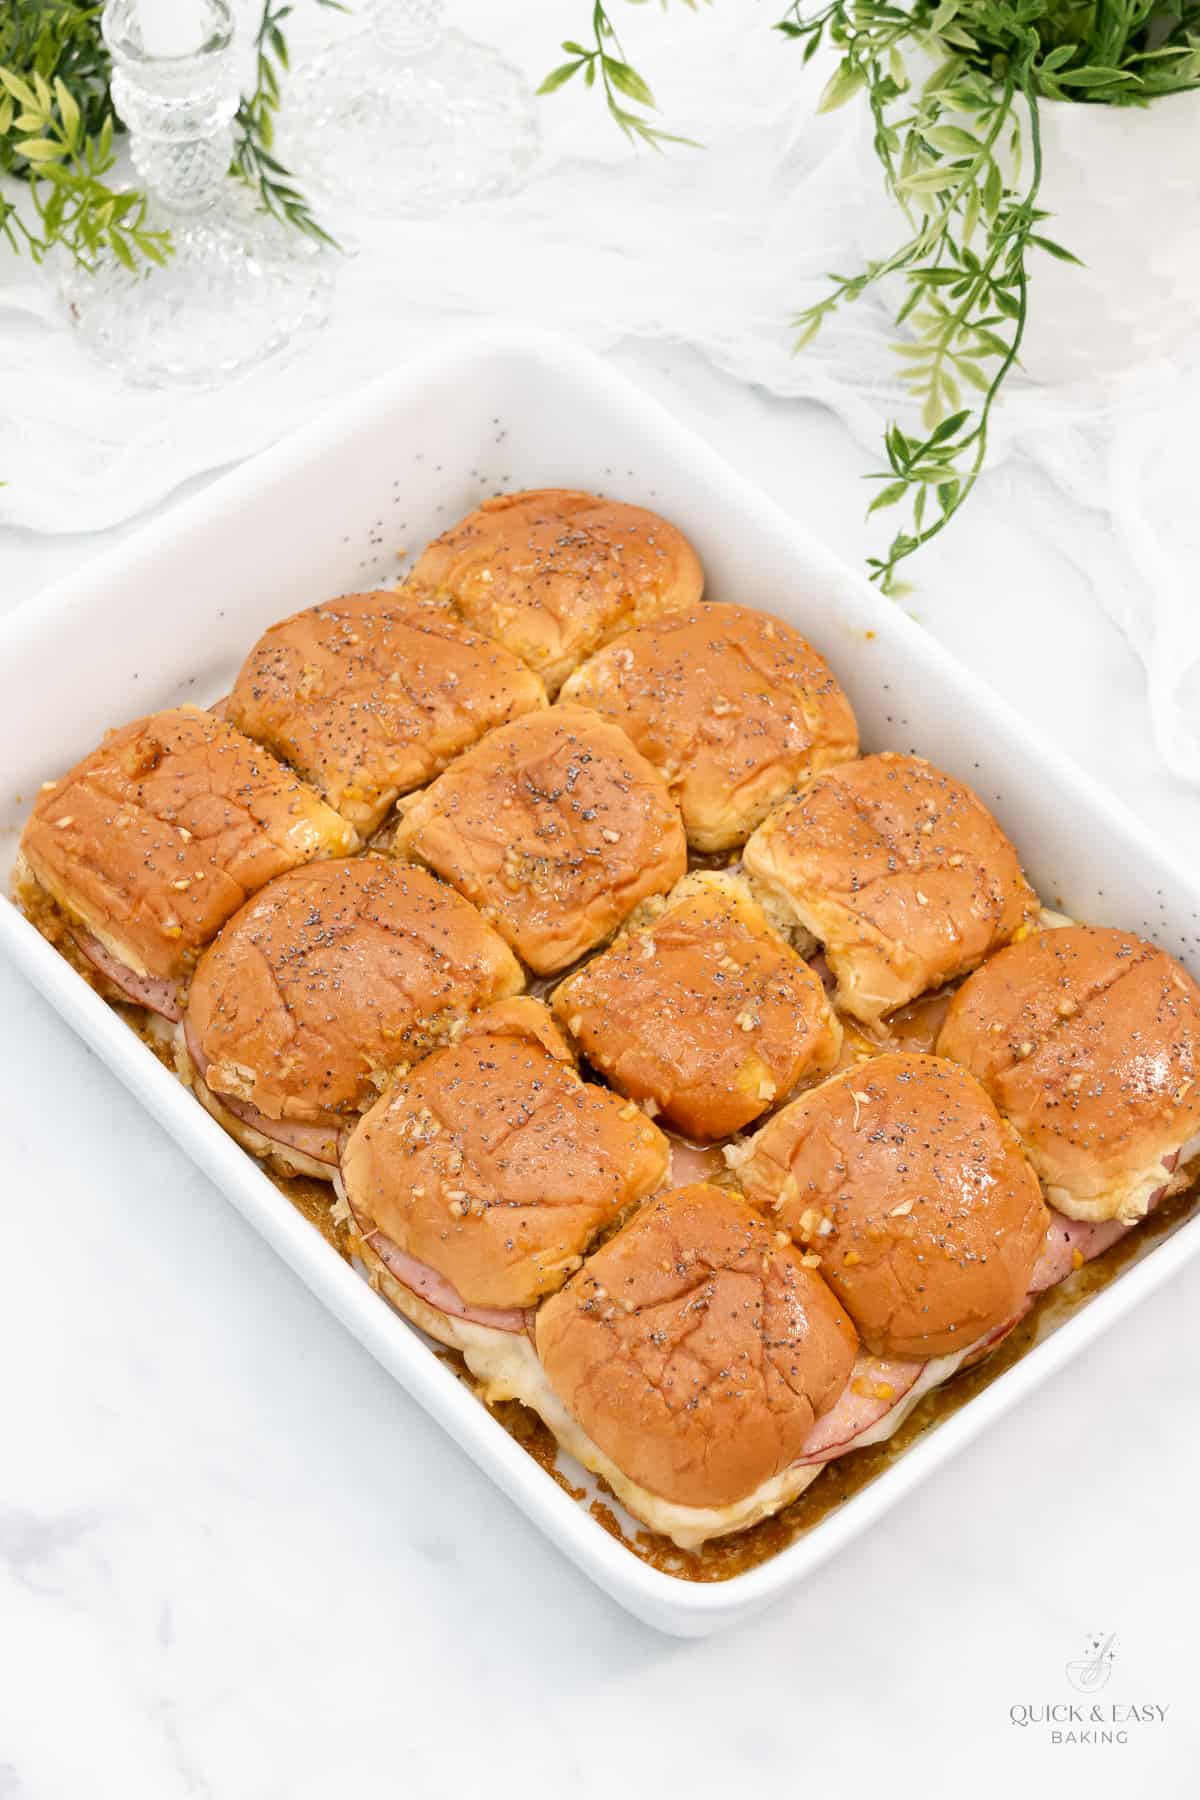 Top view of baked sliders in a white dish.